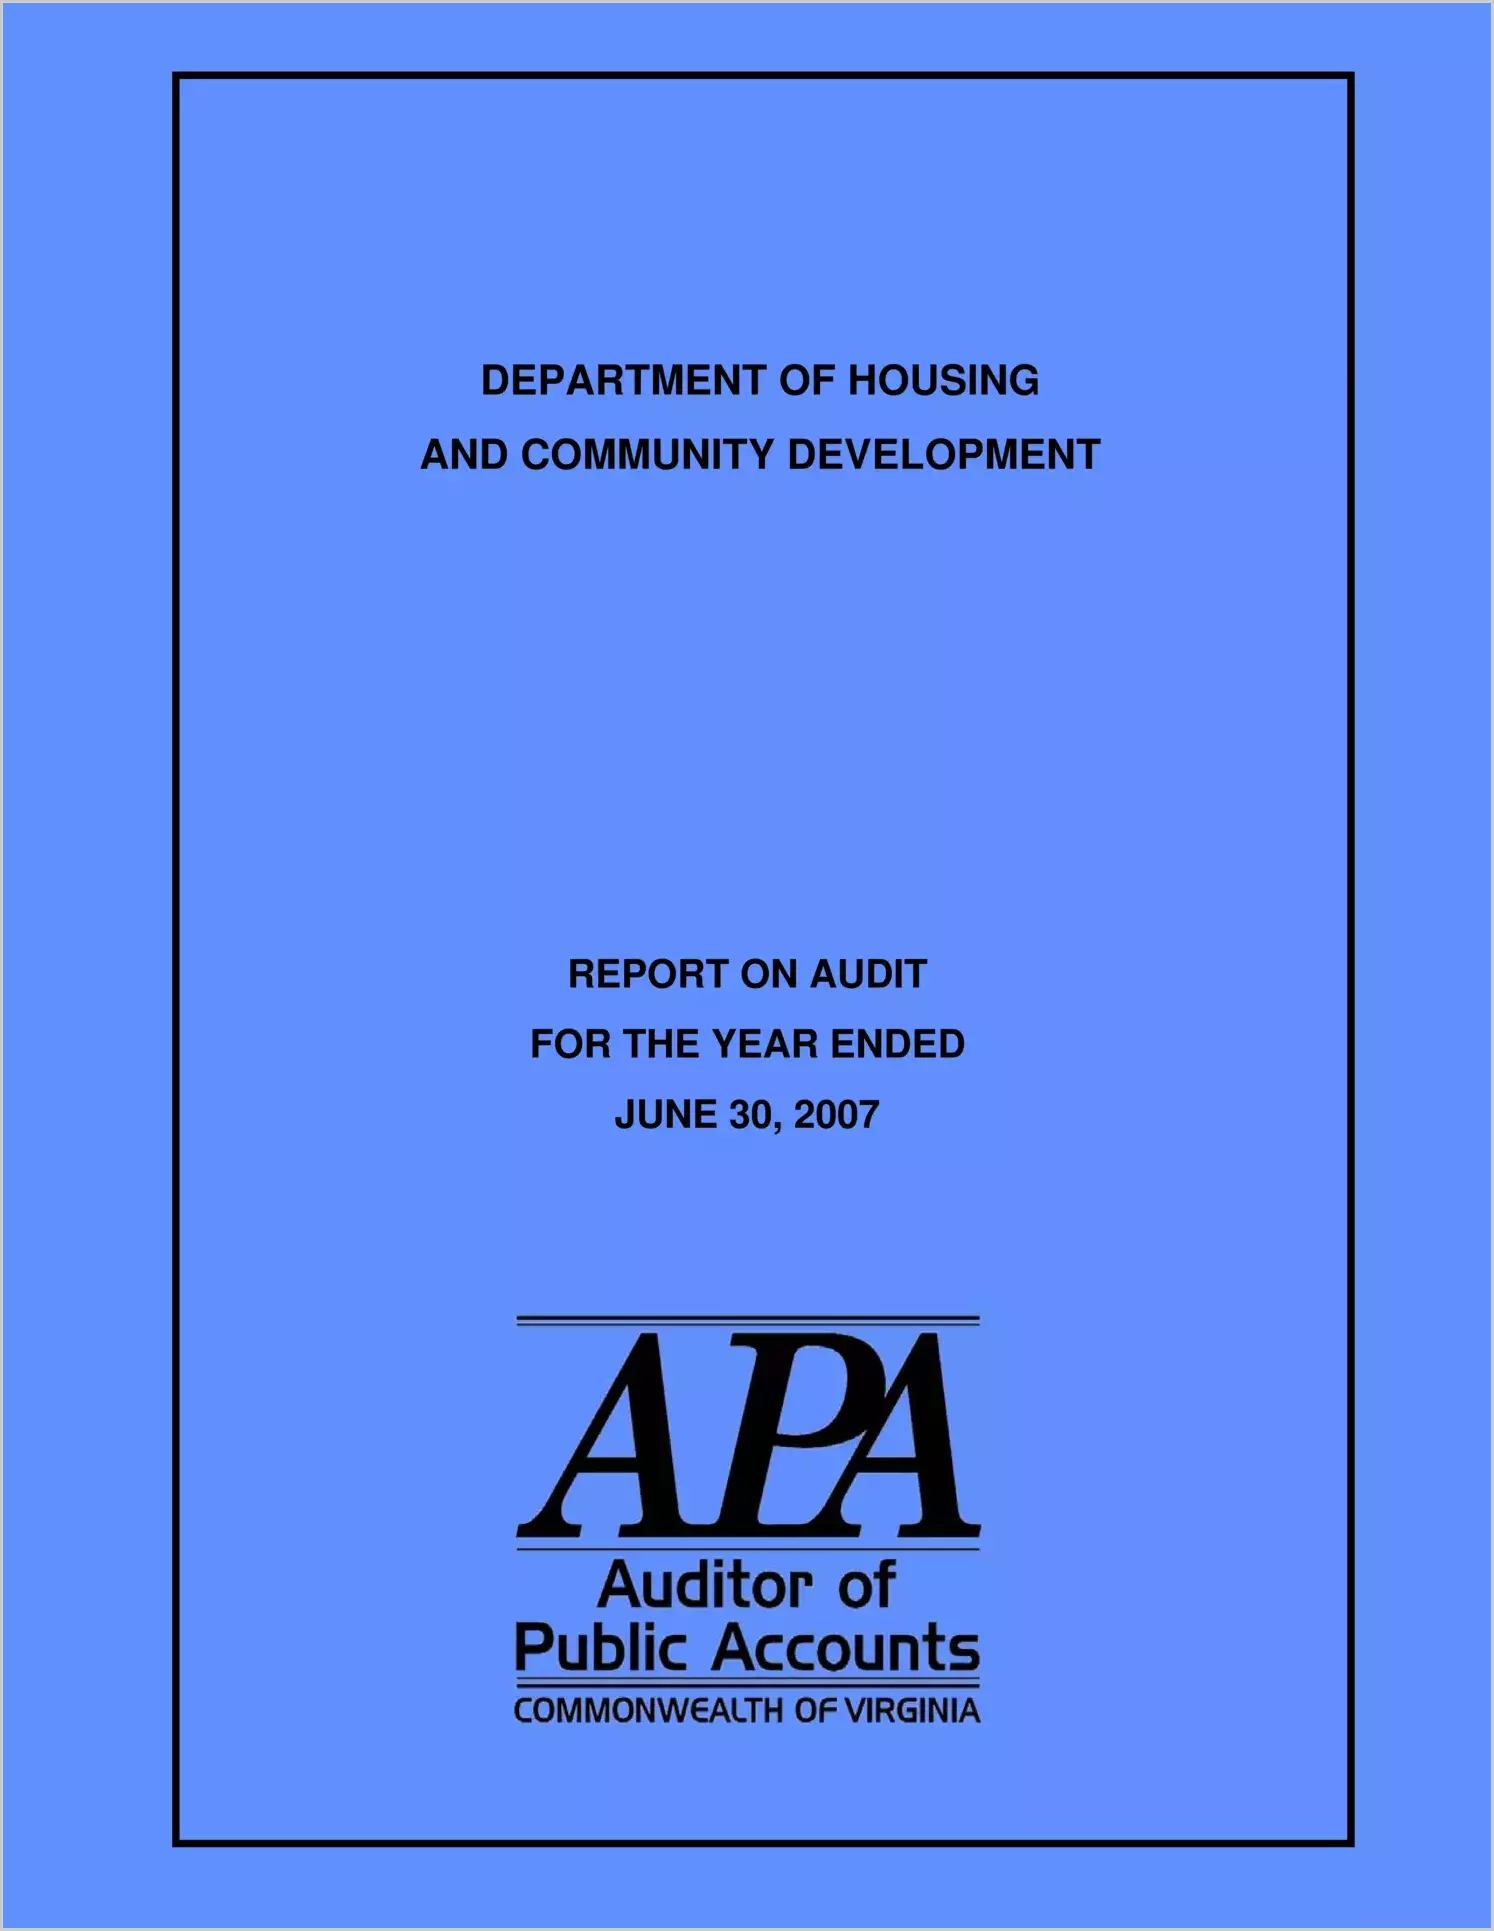 Department of Housing and Community Development report on audit for the year ended June 30, 2007